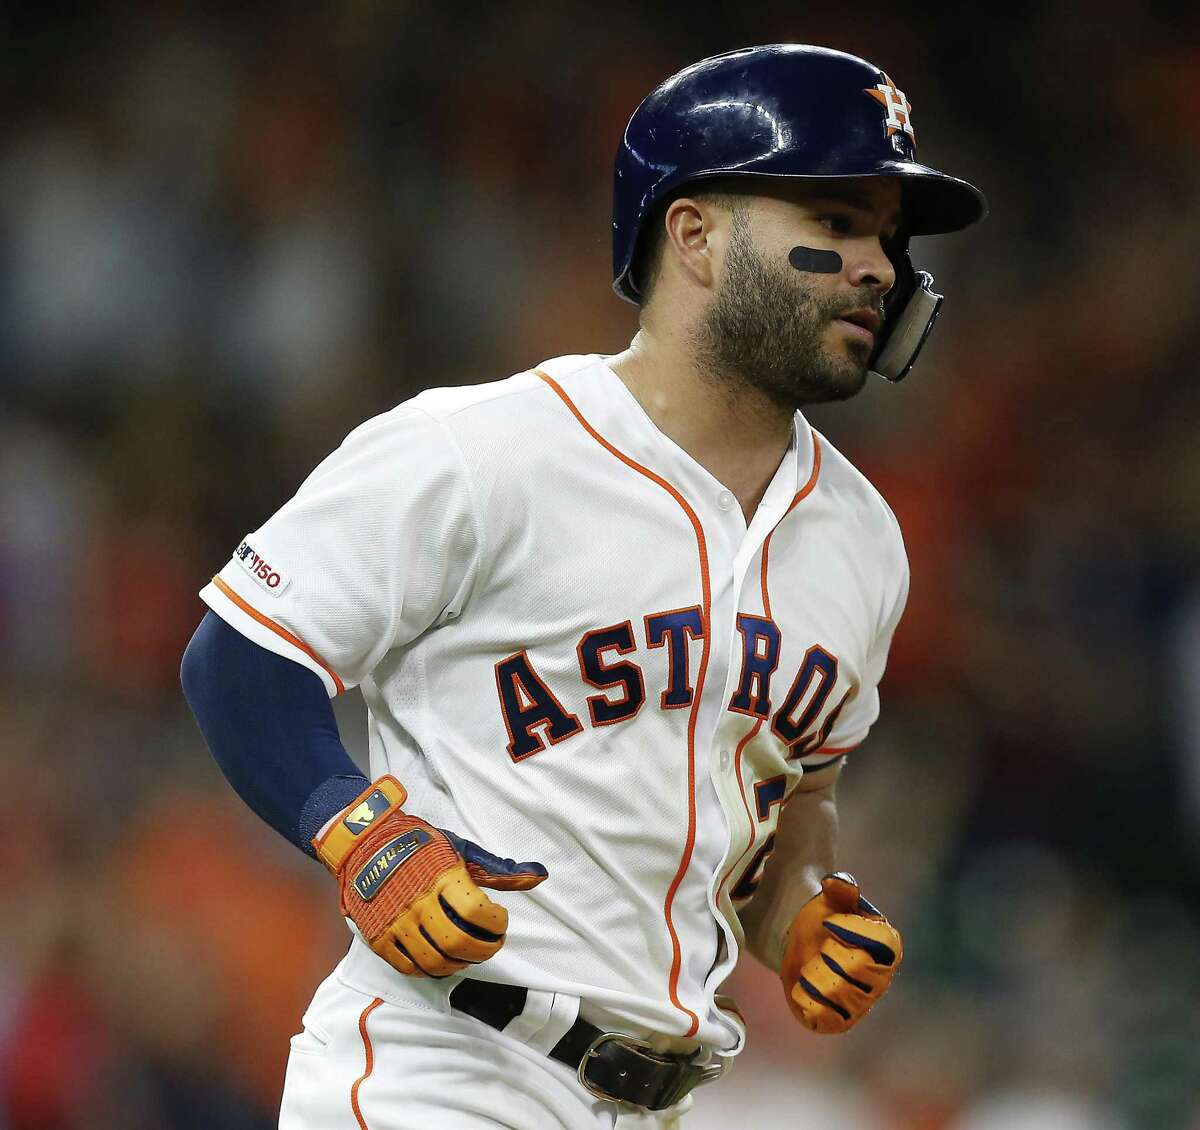 HOUSTON, TEXAS - APRIL 23: Jose Altuve #27 of the Houston Astros hits a three run home run in the eighth inning against the Minnesota Twins at Minute Maid Park on April 23, 2019 in Houston, Texas. (Photo by Bob Levey/Getty Images)